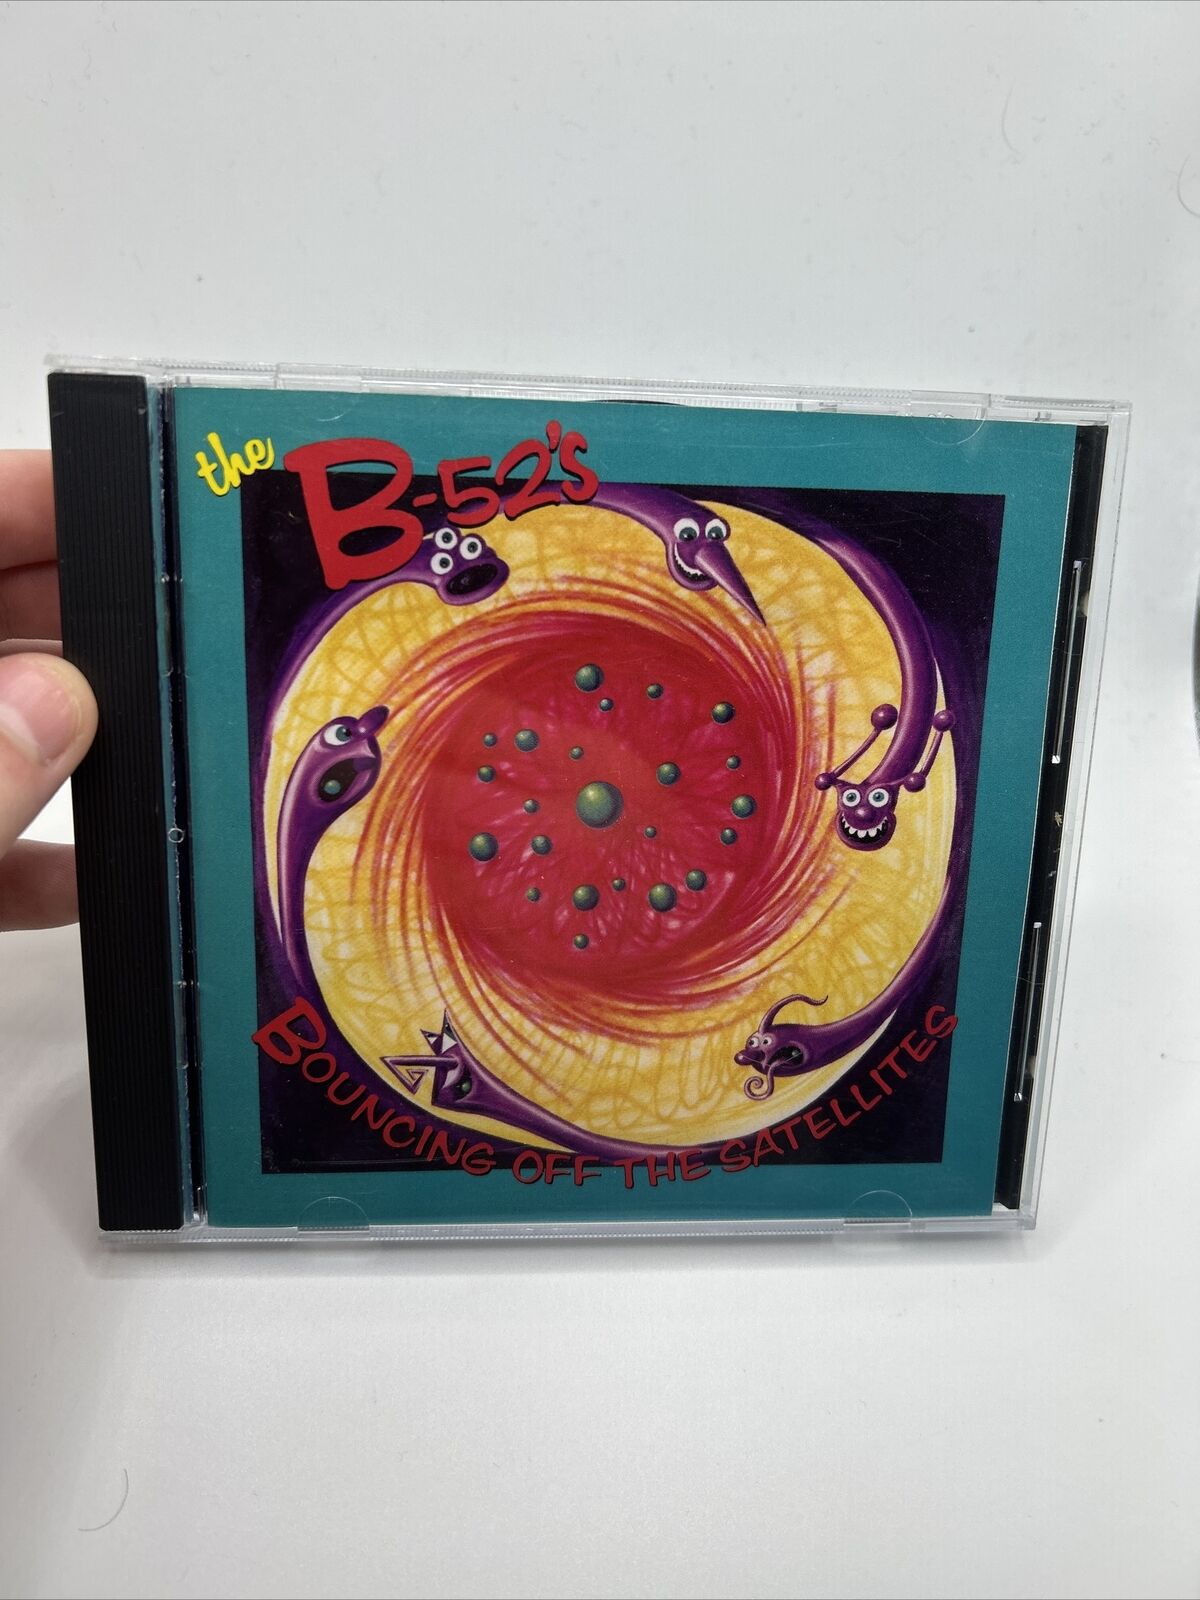 The B-52’s - Bouncing Off The Satellites - Warner Bros [CD]